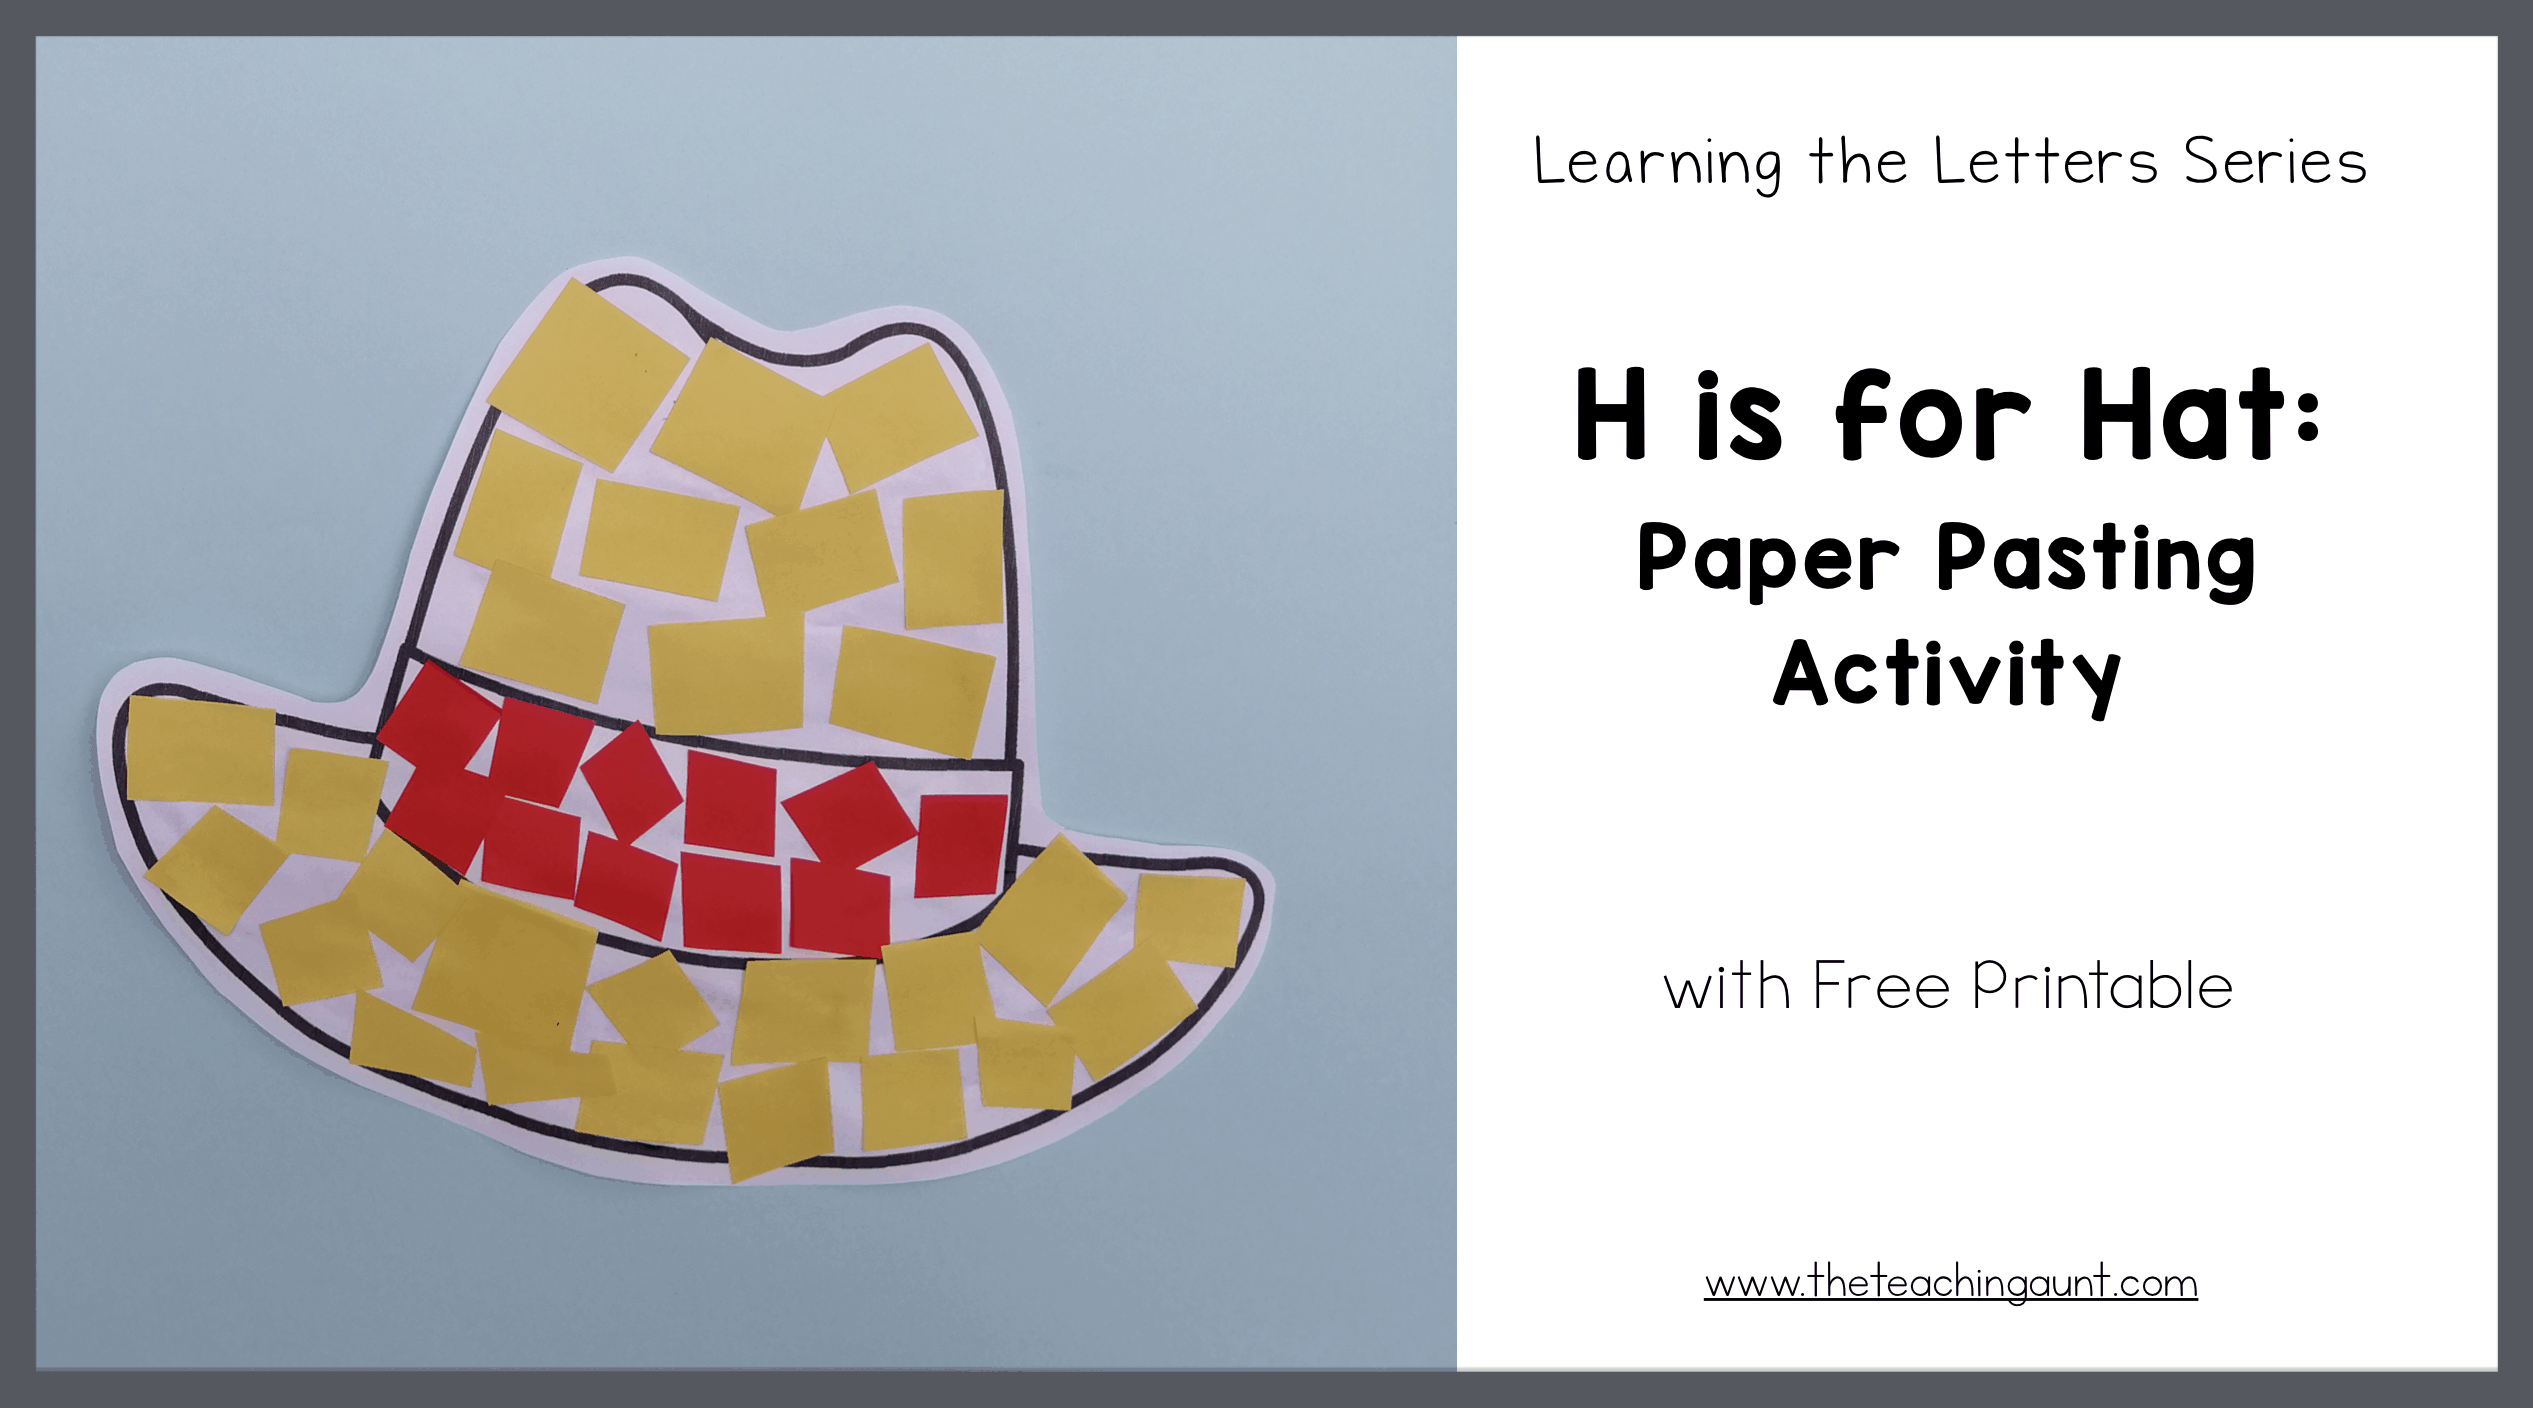 H is for Hat: Paper Pasting Activity with Free Printable